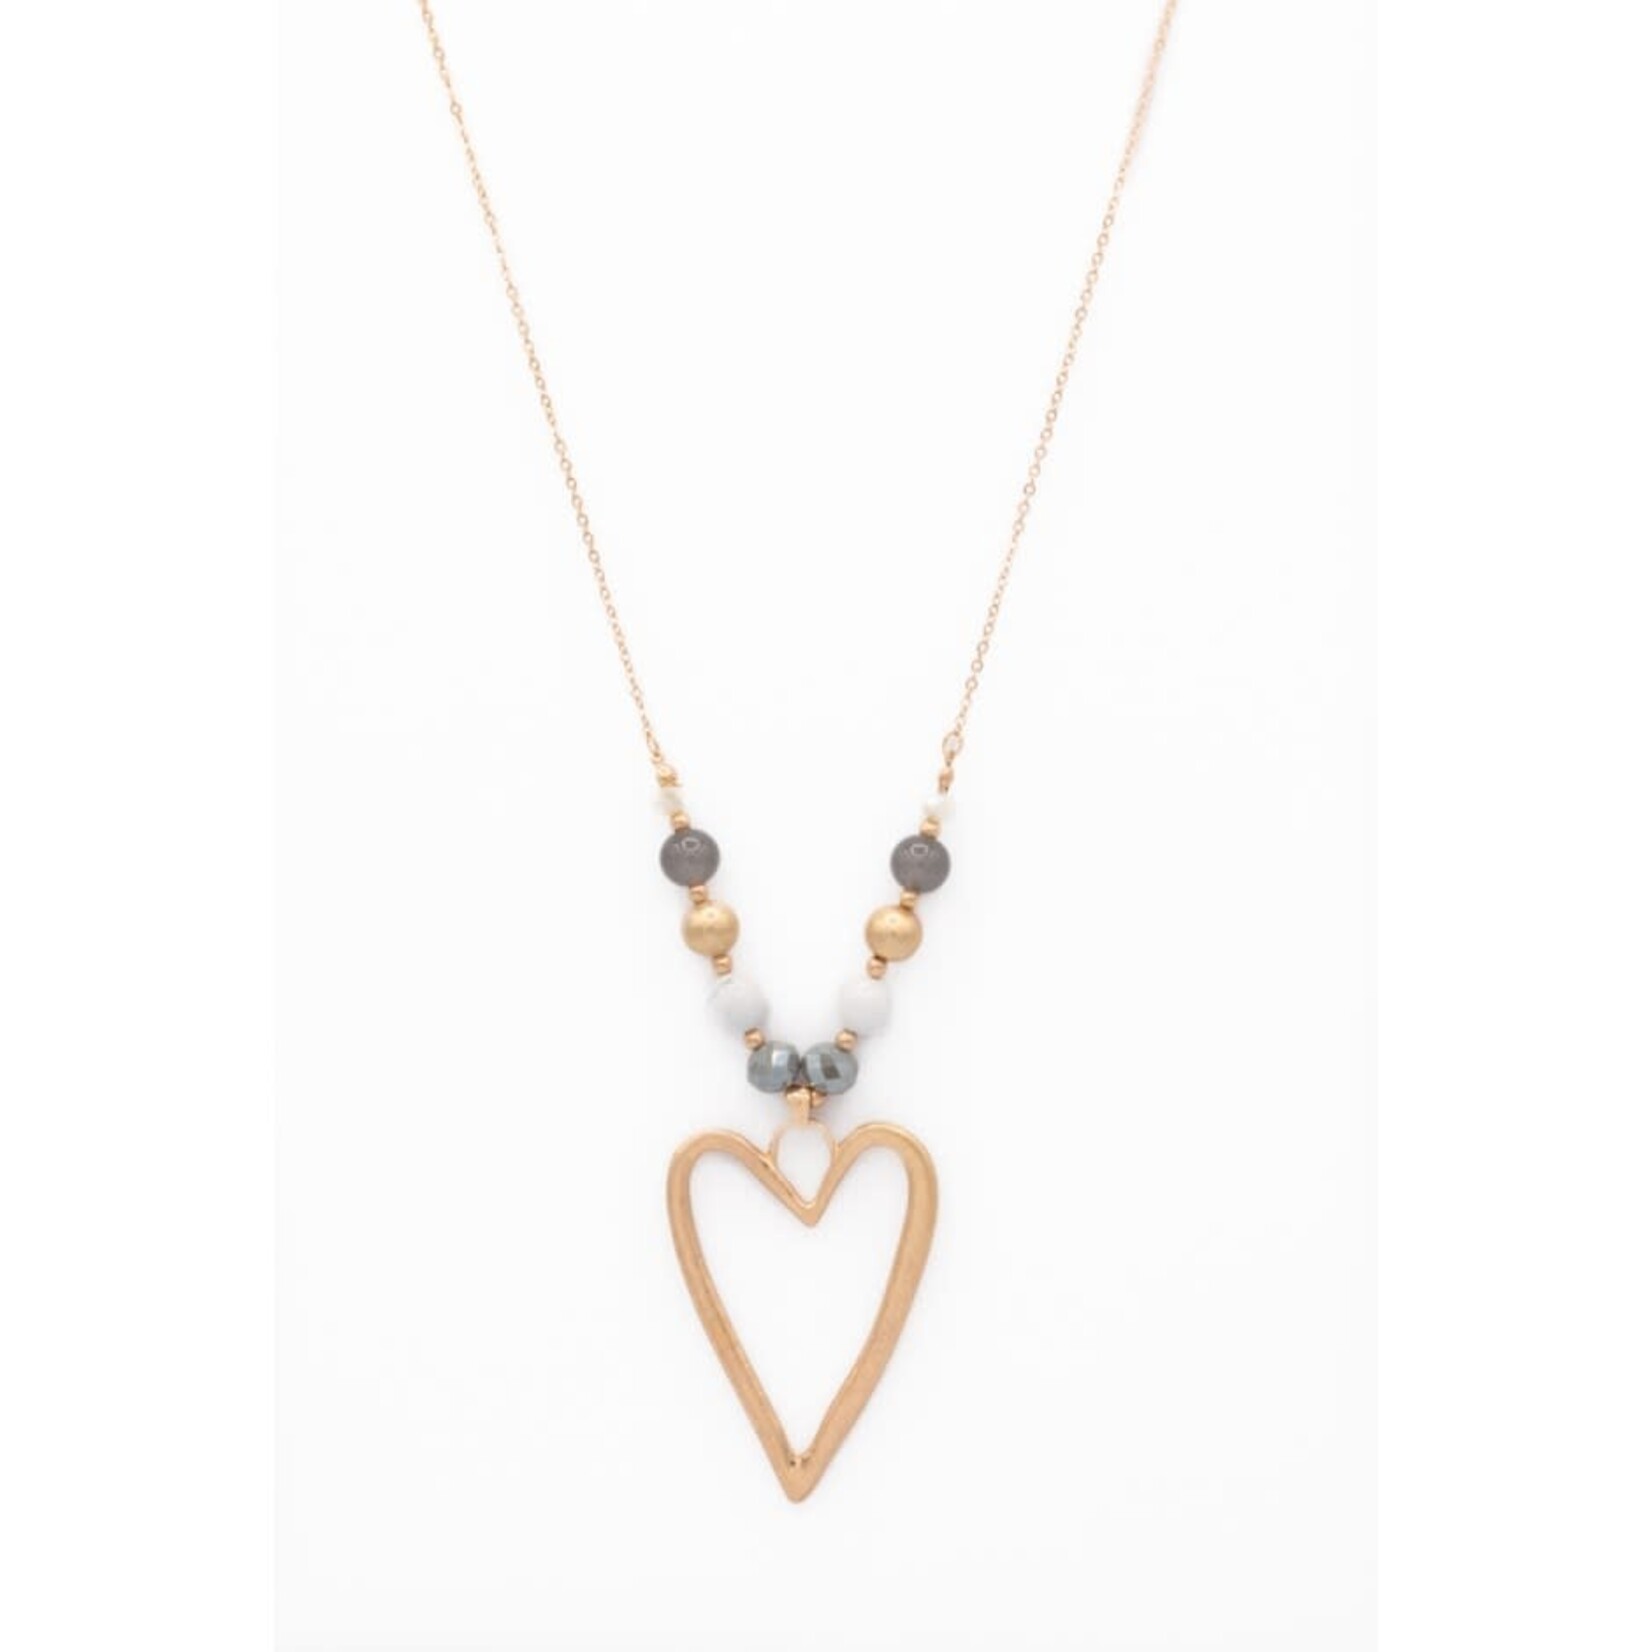 Metal Heart Pendant on Adjustable Chain w/ Assorted Beads - Taupe/Gold